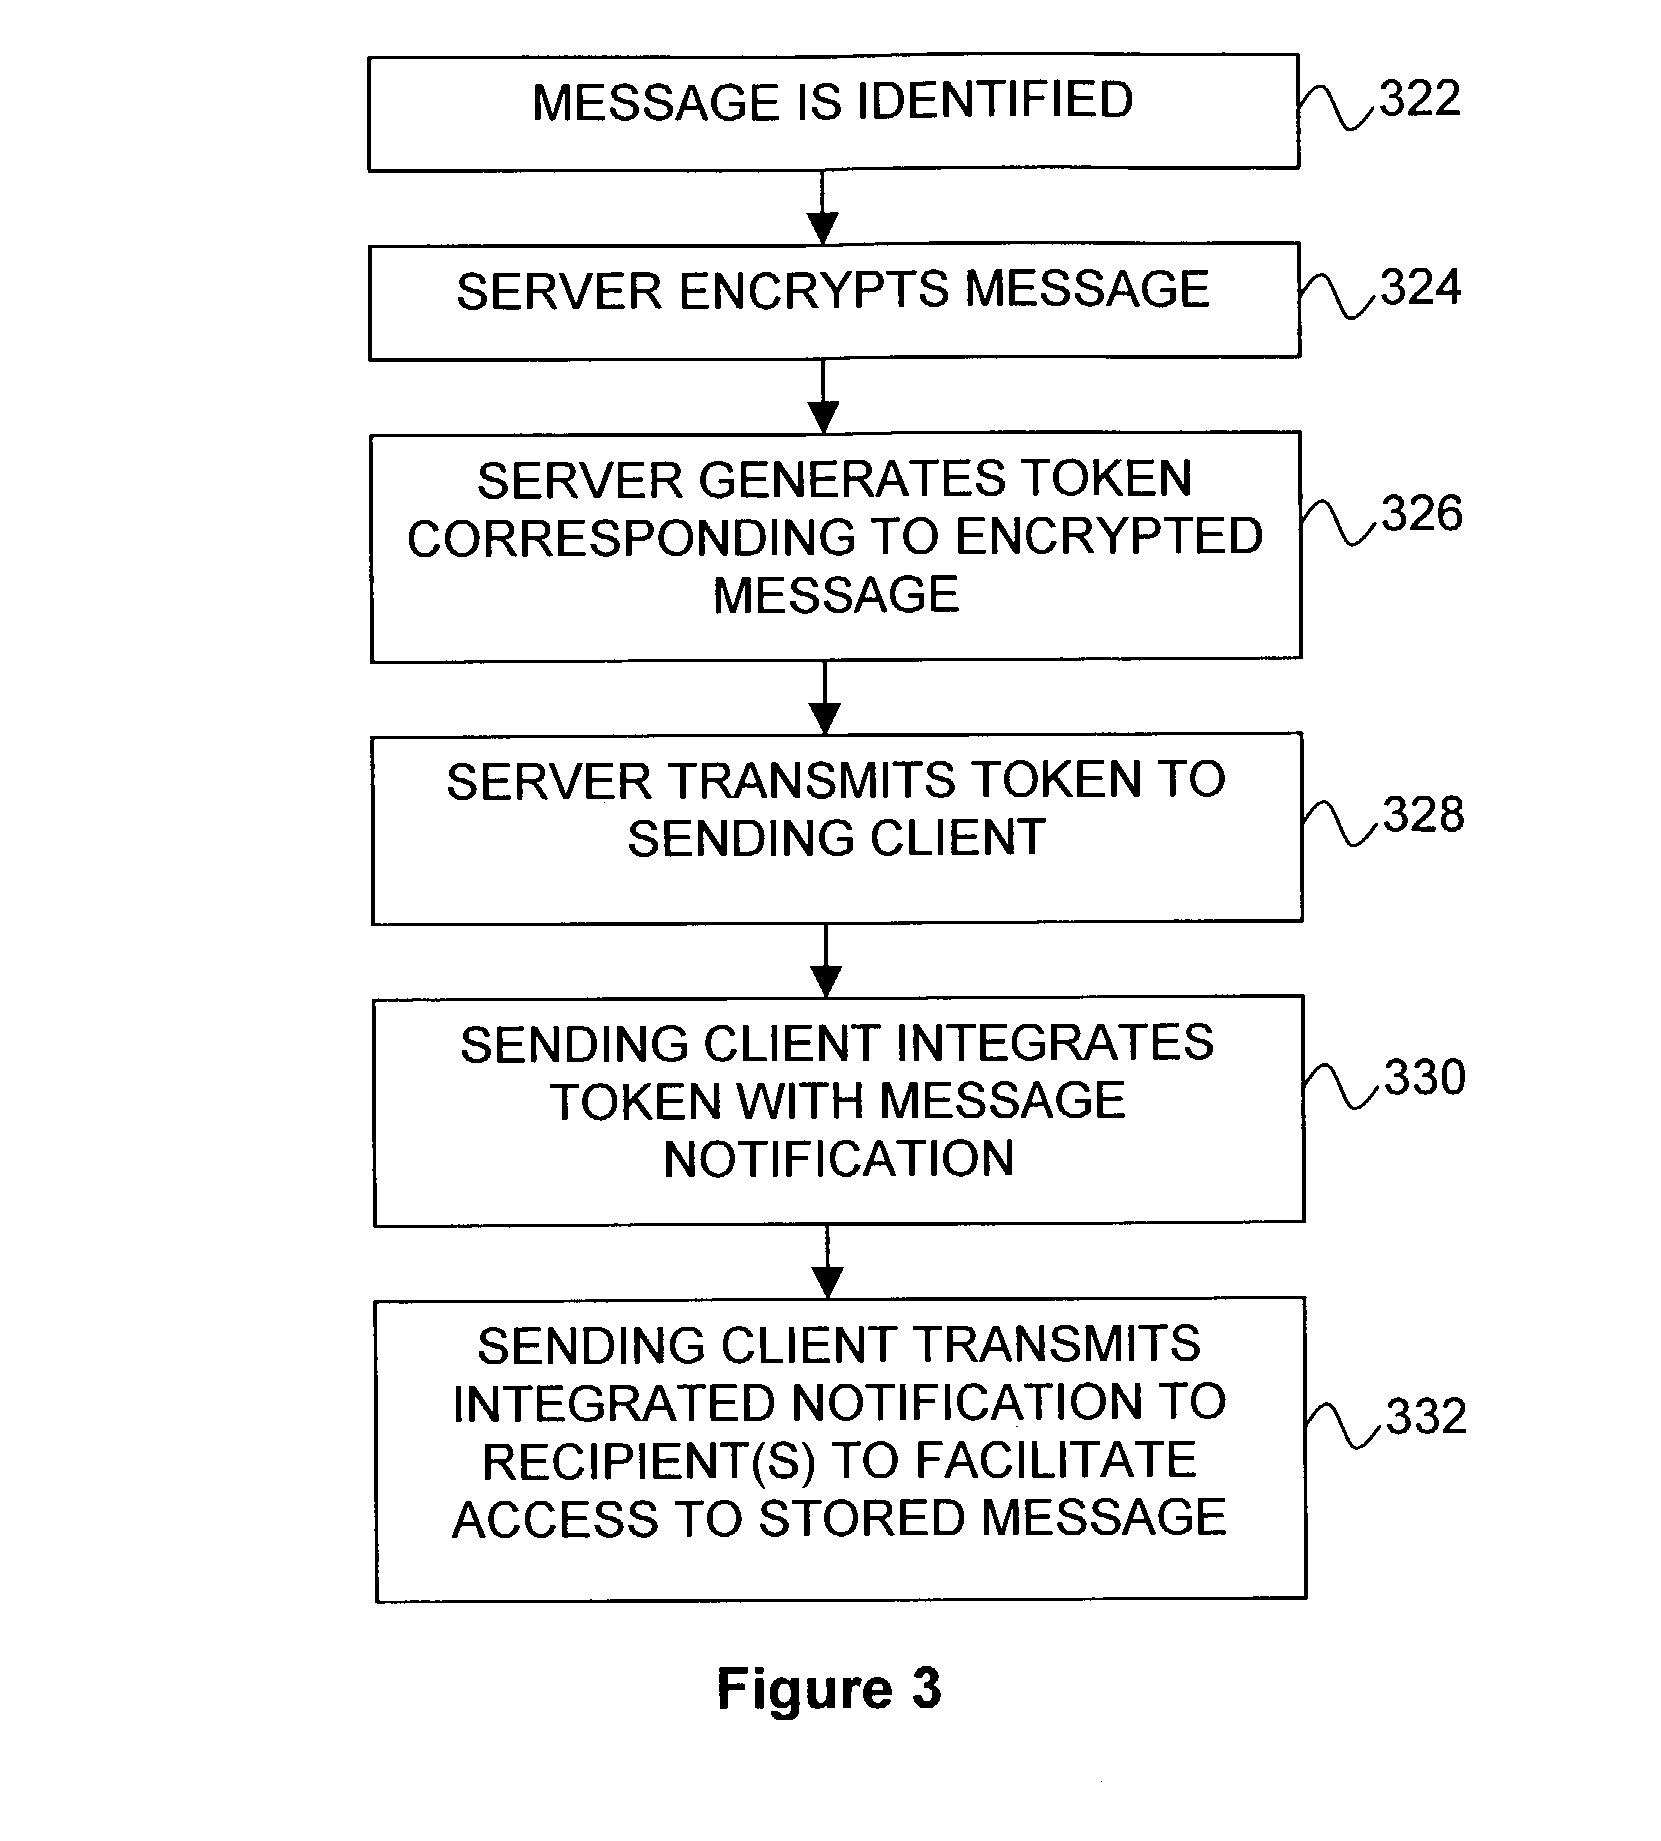 Preemptive and interactive data solicitation for electronic messaging